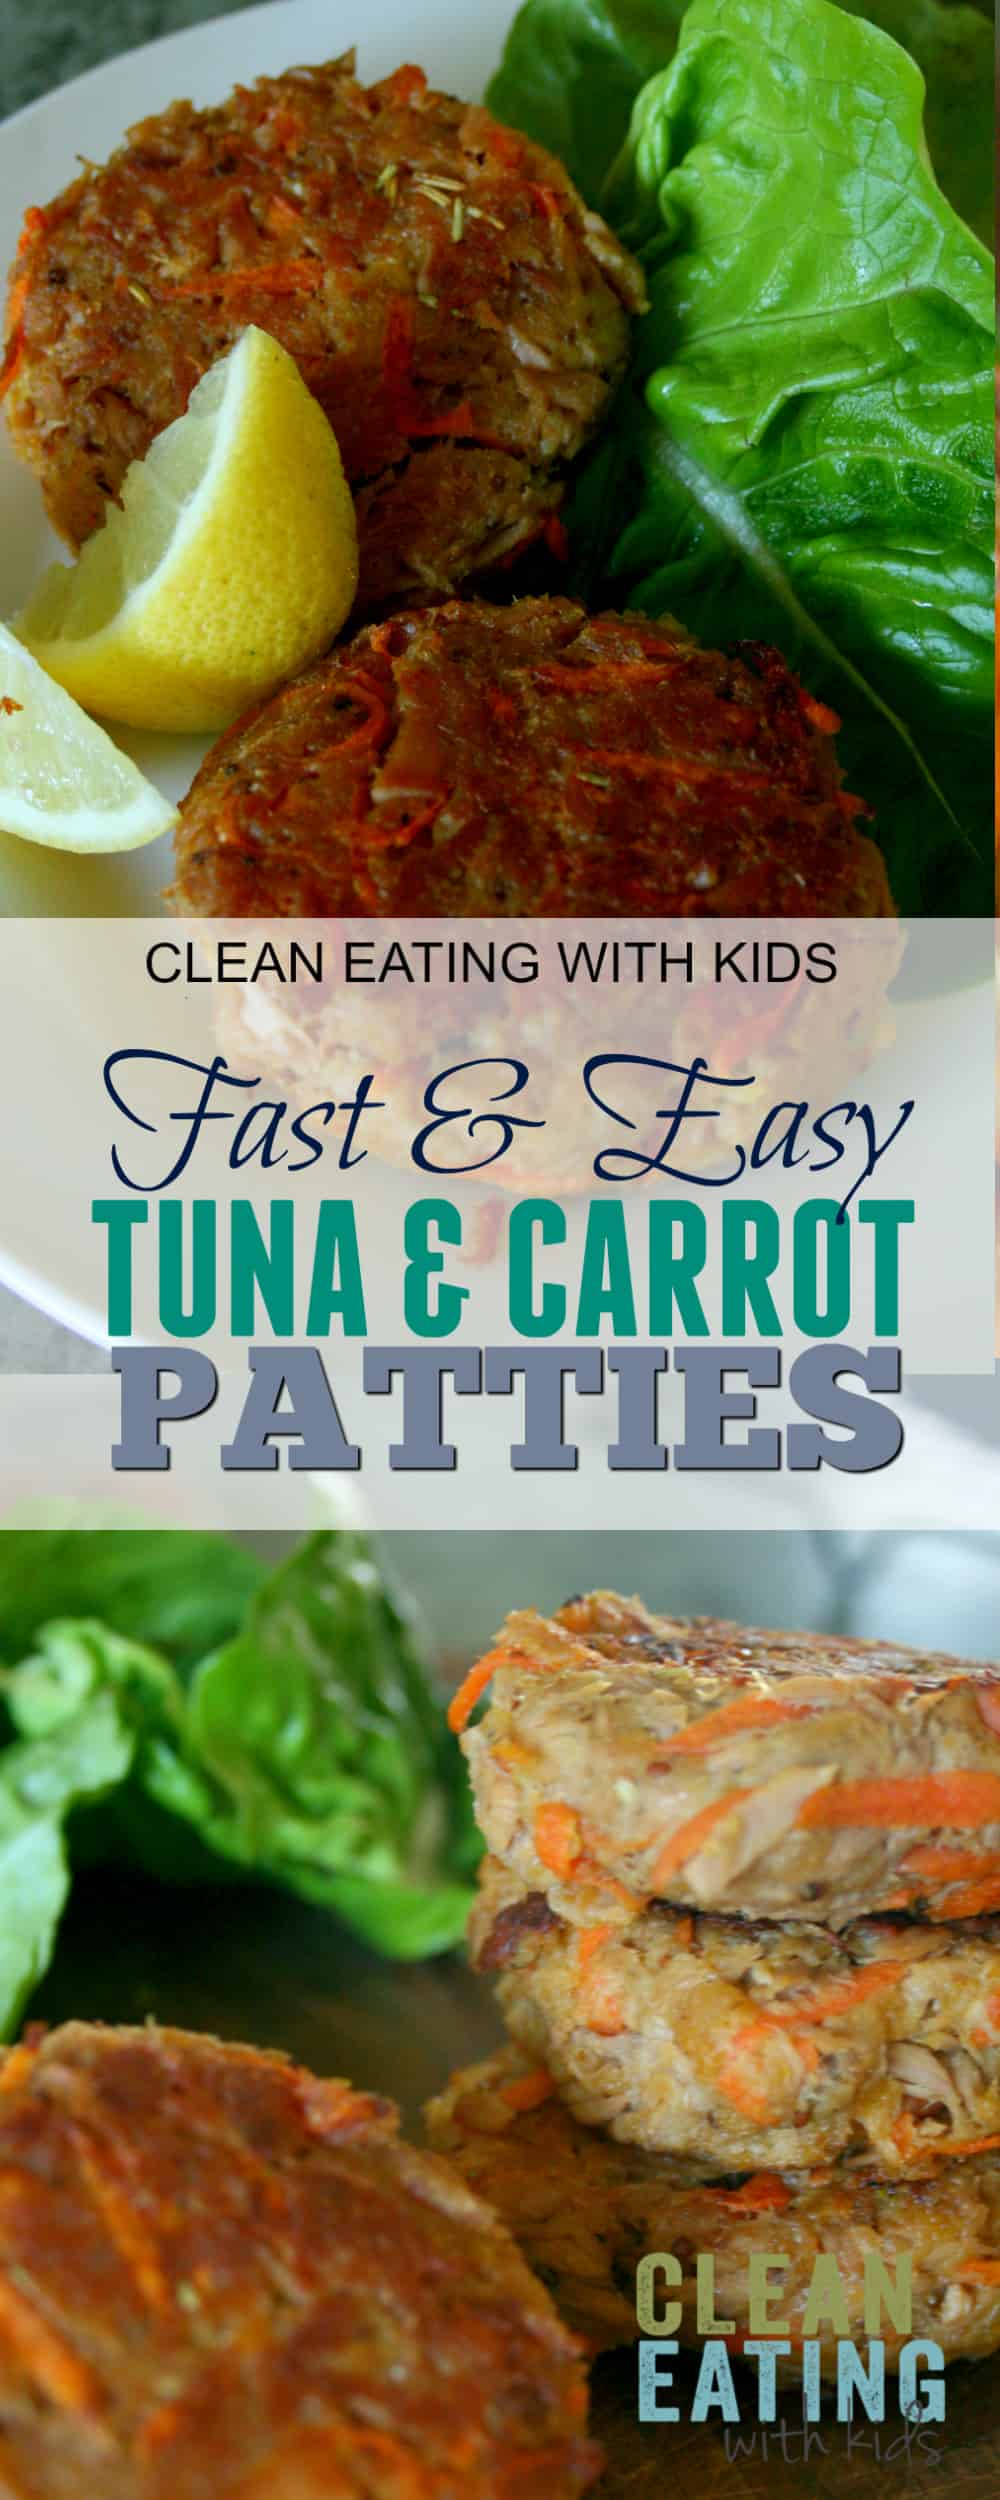 Quick, easy and delicious Clean Eating tuna patties! Best thing is you make them using canned tuna. Kid Friendly & Budget friendly!